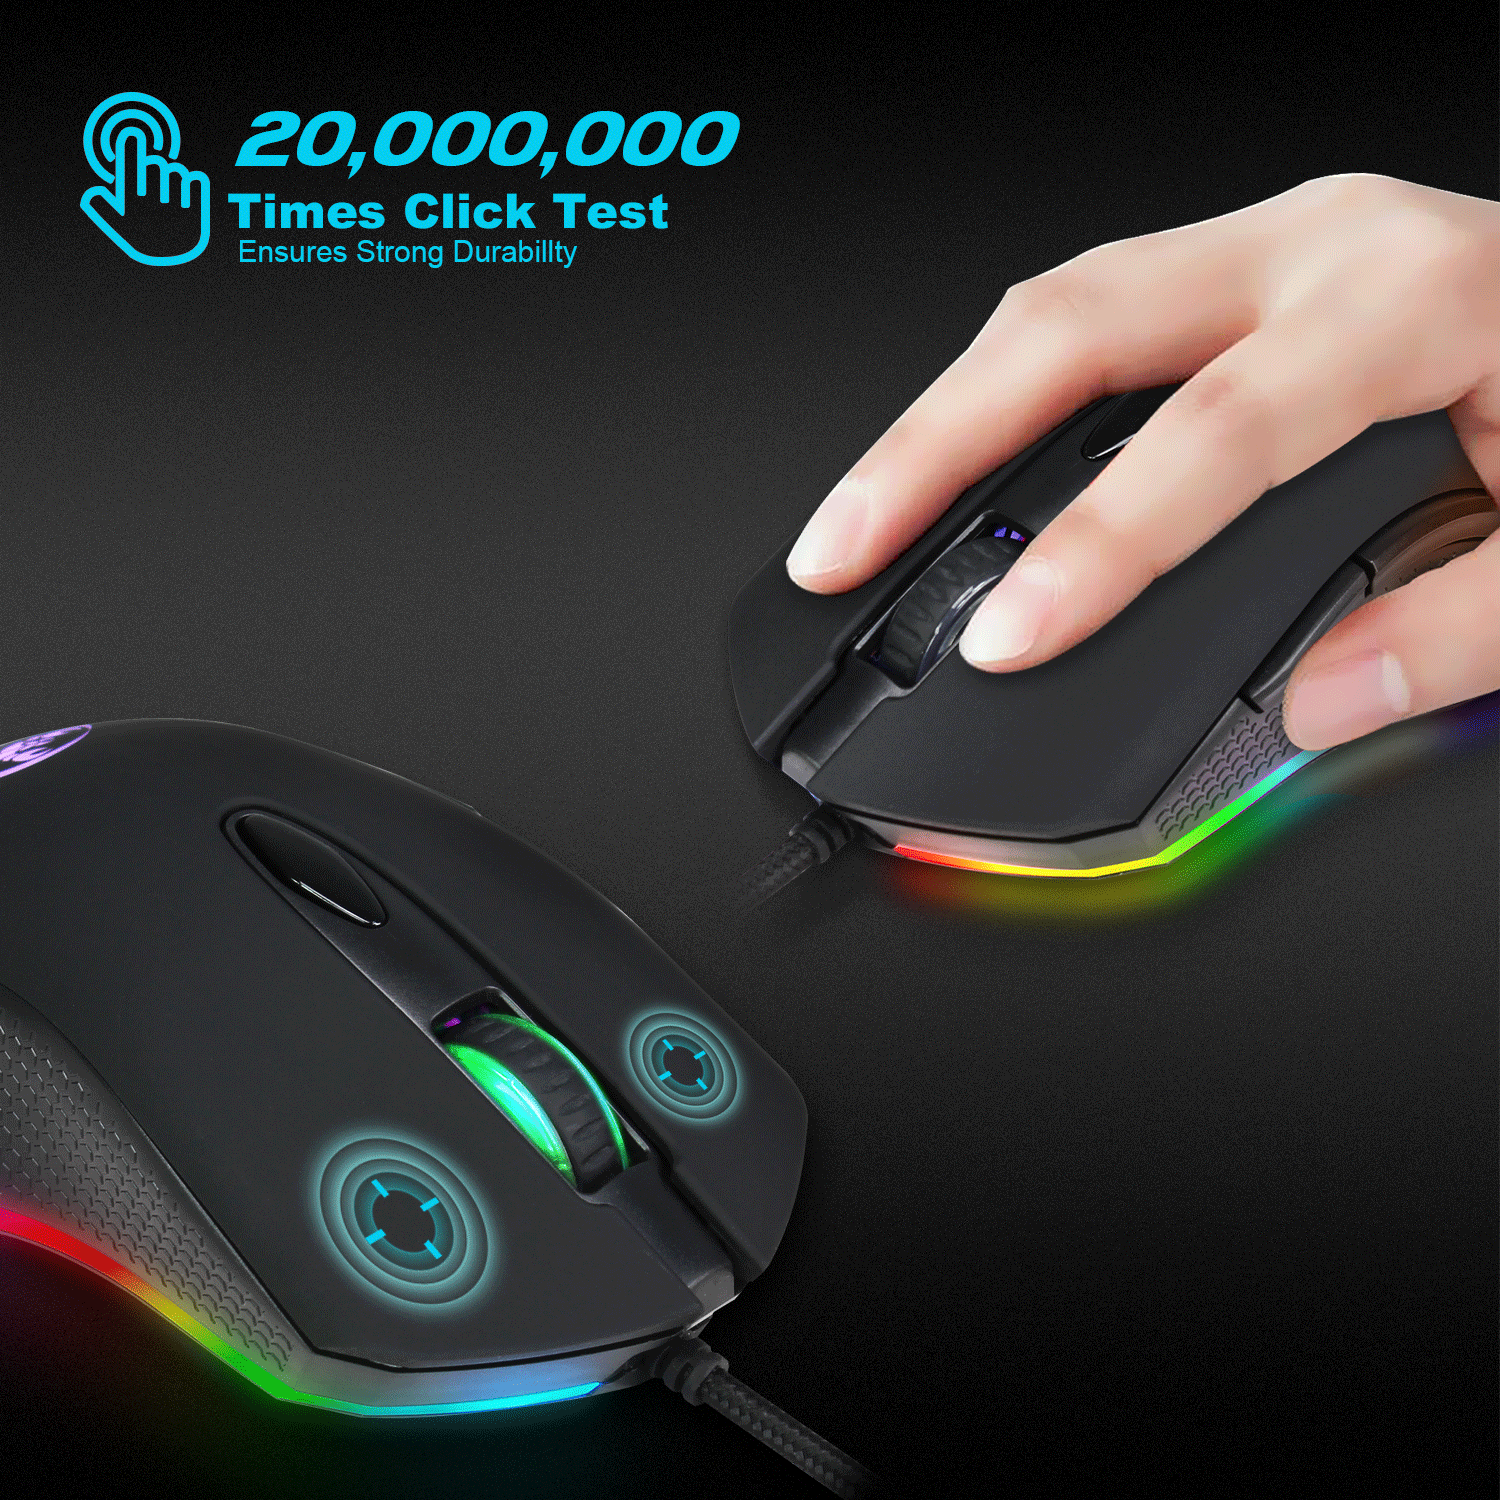 HXSJ S500 RGB Backlit Gaming Mouse 6 Buttons 4800DPI Optical USB Wired Mice Macros Define 7